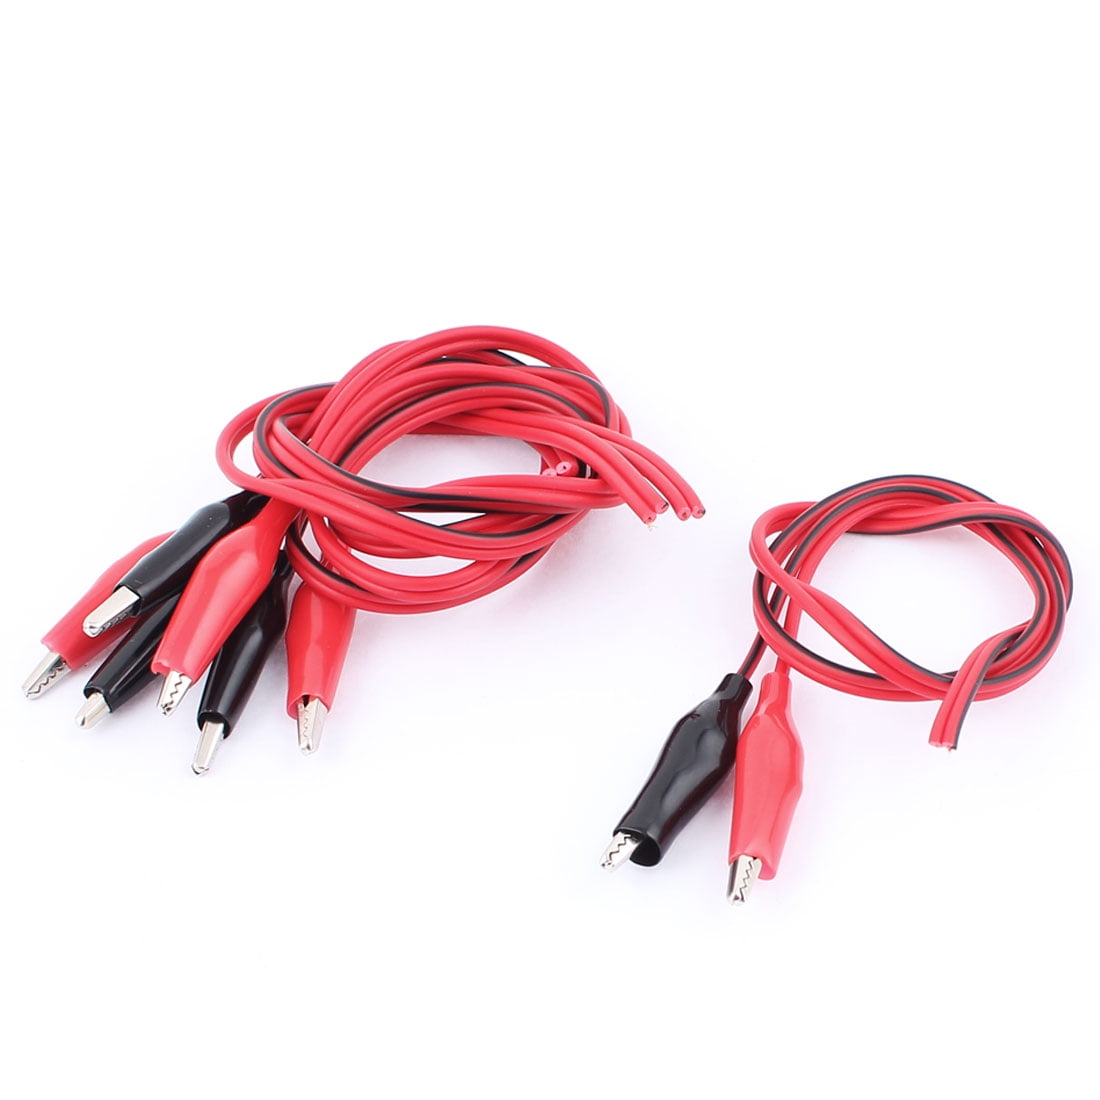 Test Leads with Alligator Clips 12”. 3 Pairs  3 Red & 3 Black 